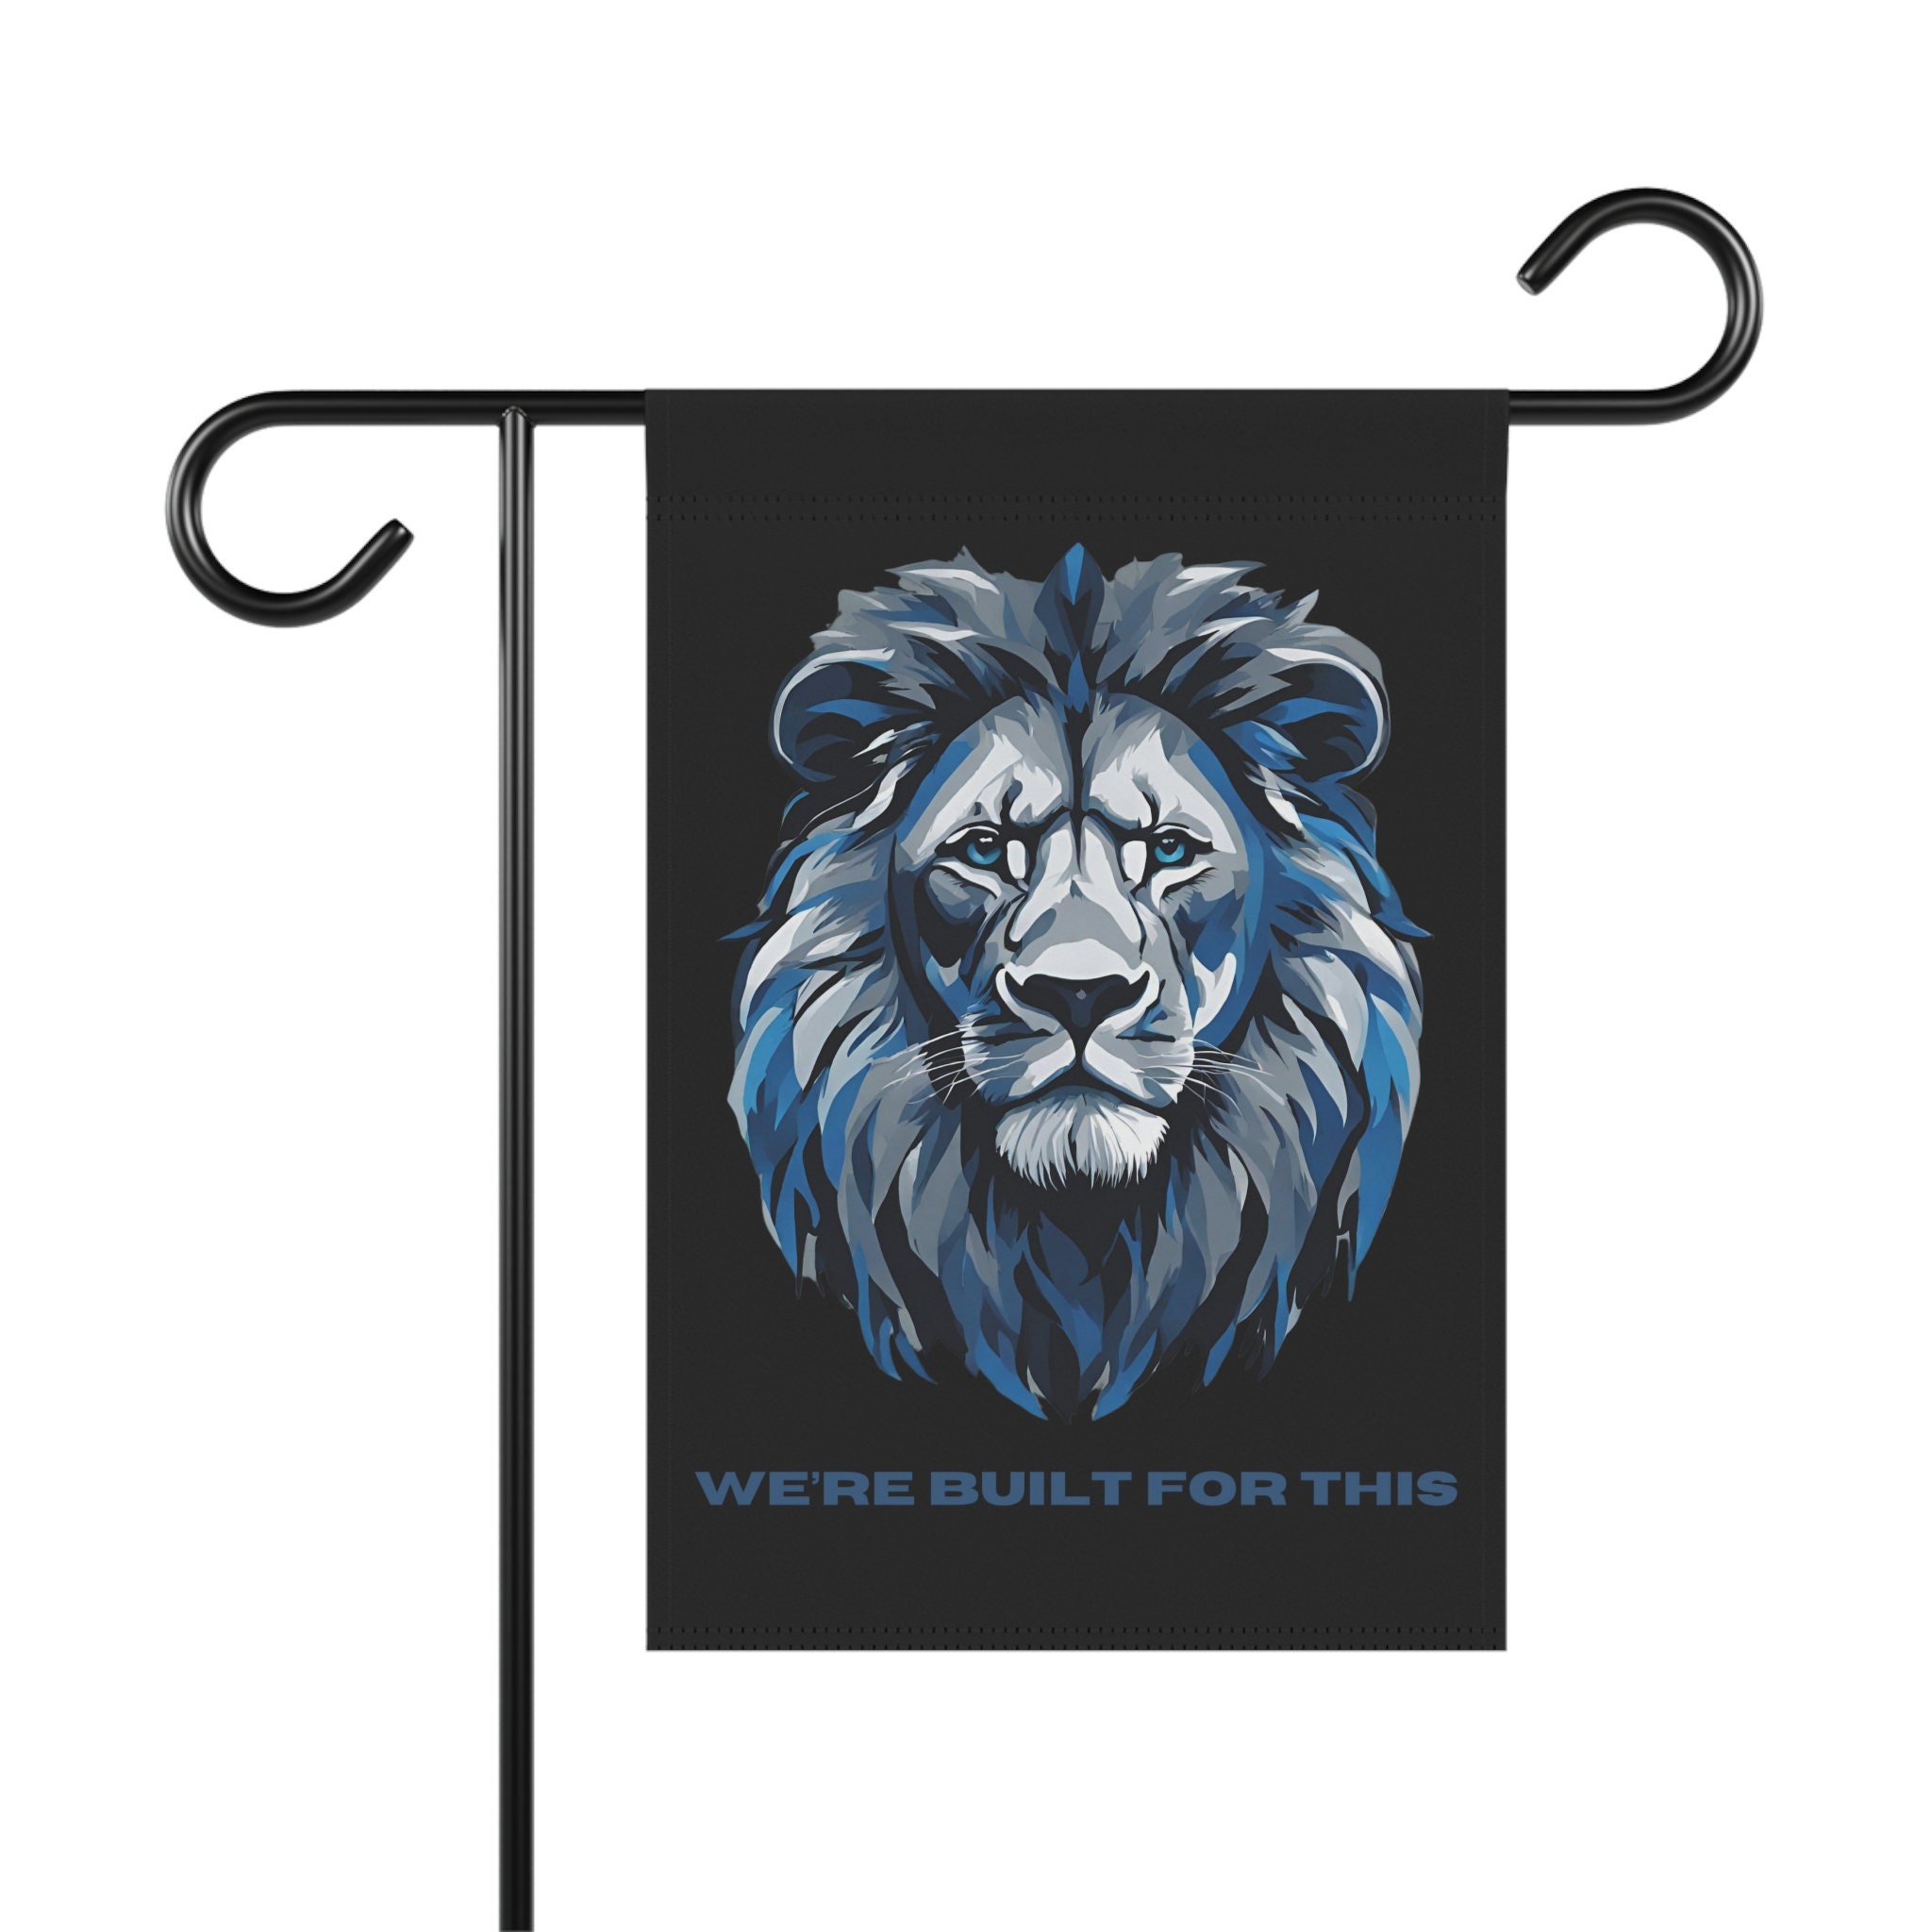  Detroit Lions Banner Window Wall Hanging Flag with Suction Cup  : Sports & Outdoors